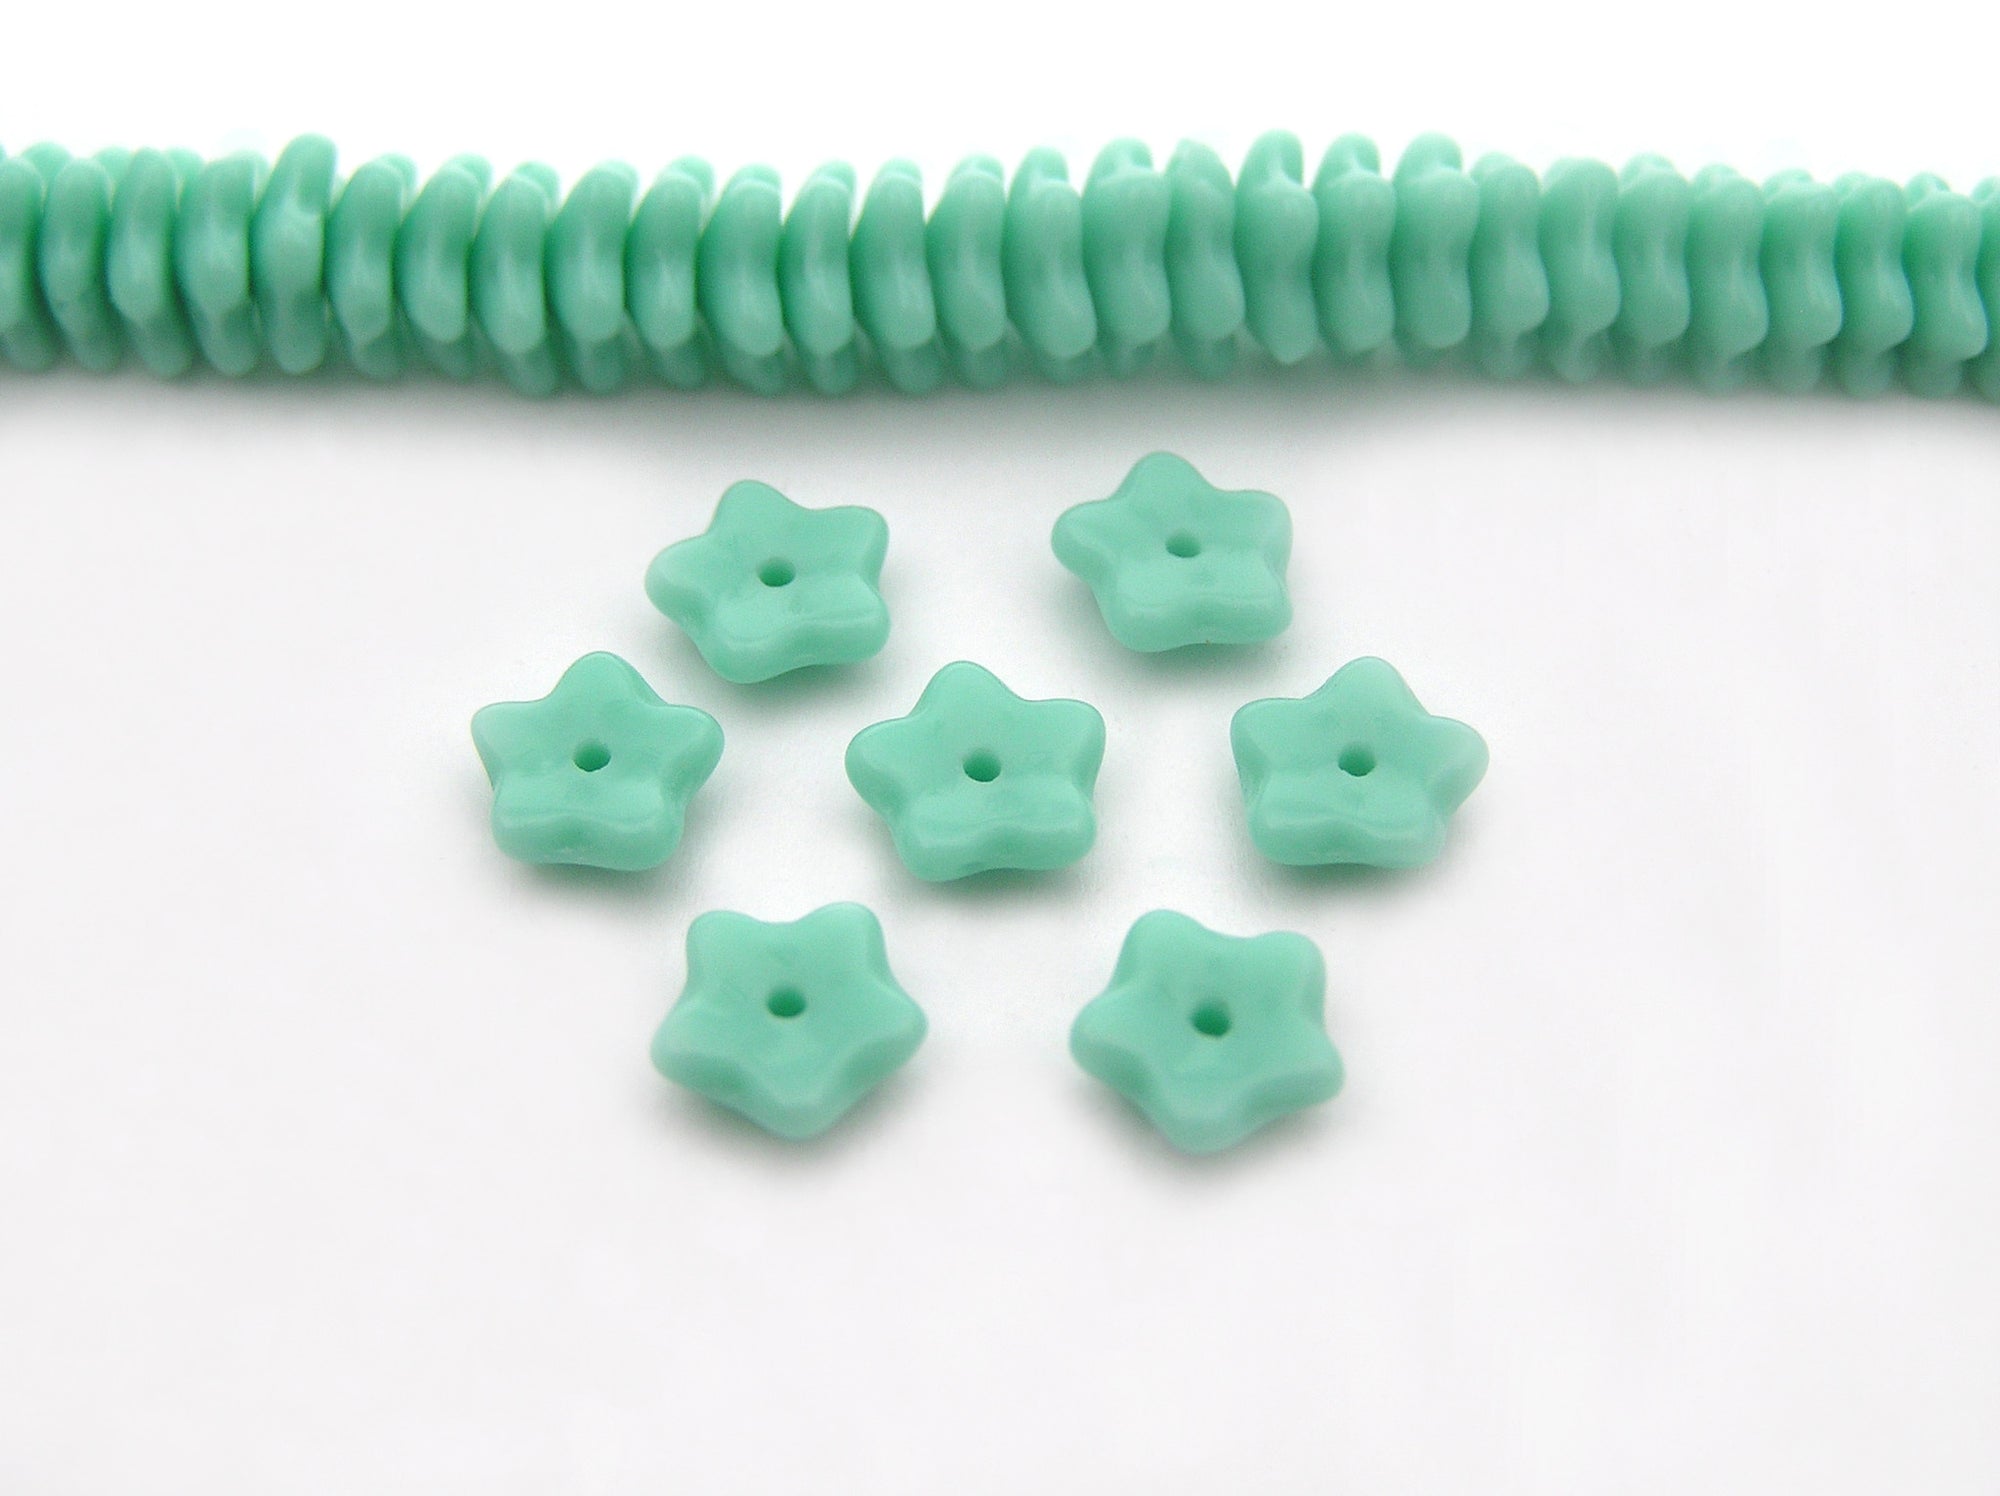 192 Czech glass flat star bead cups 7x3mm Opaque Green (Green Turquoise) color, 16 inch strand